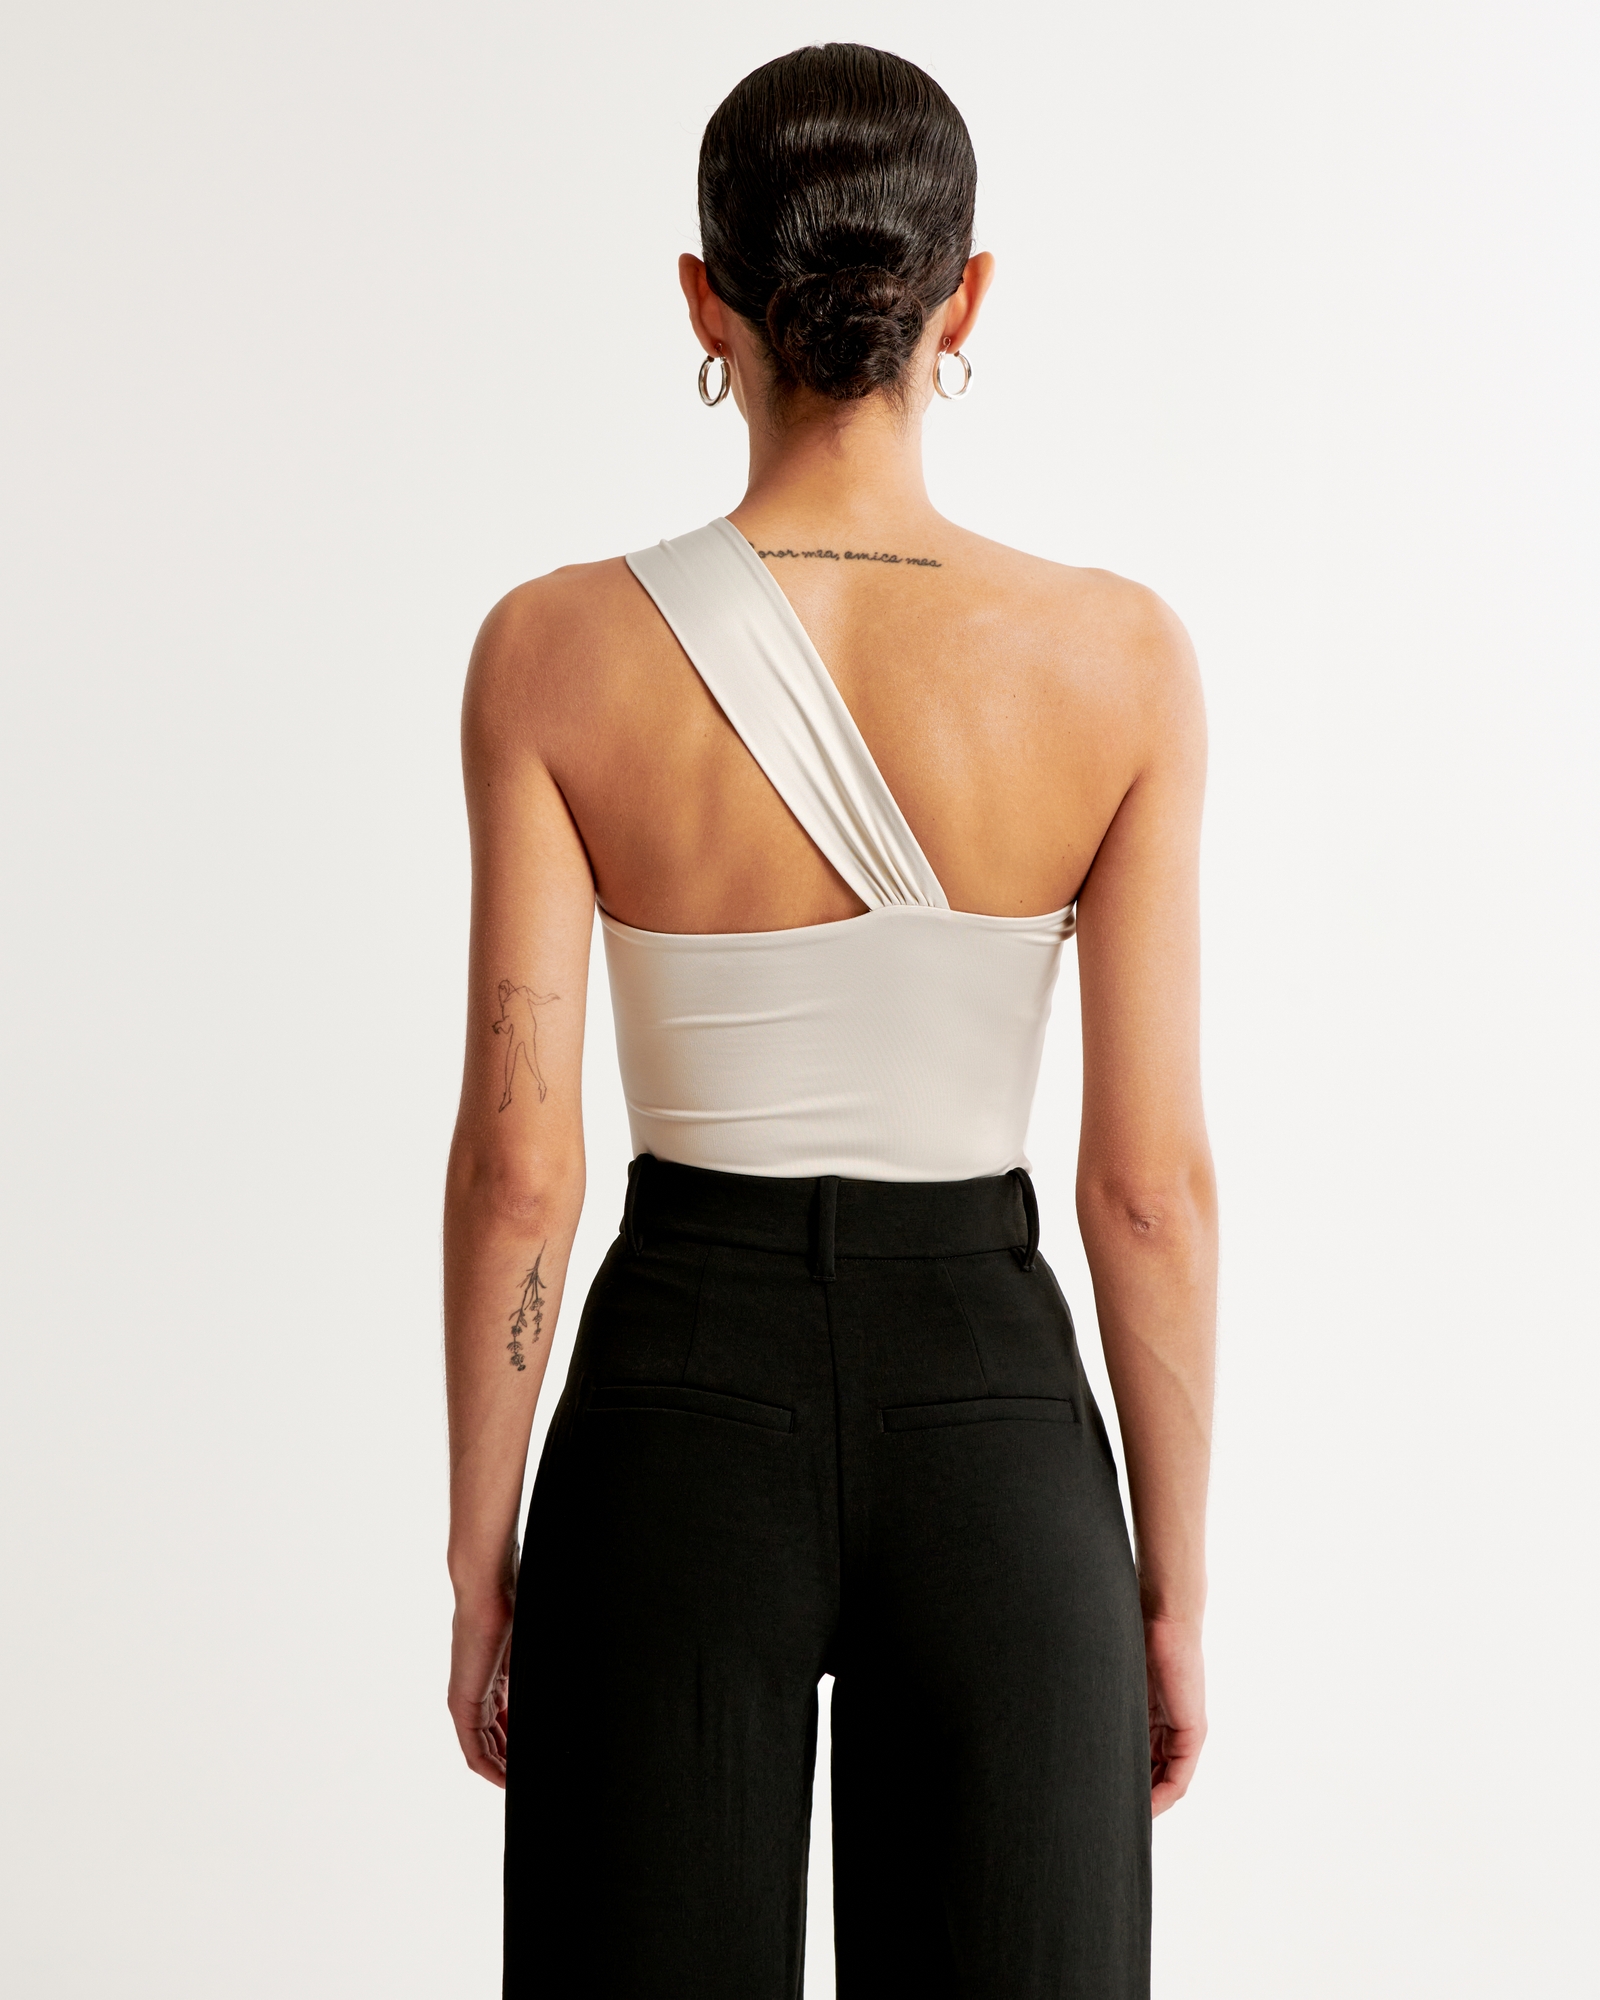 One Shoulder Top, Asymmetrical One Sleeve Top, Open Back Wrap Top